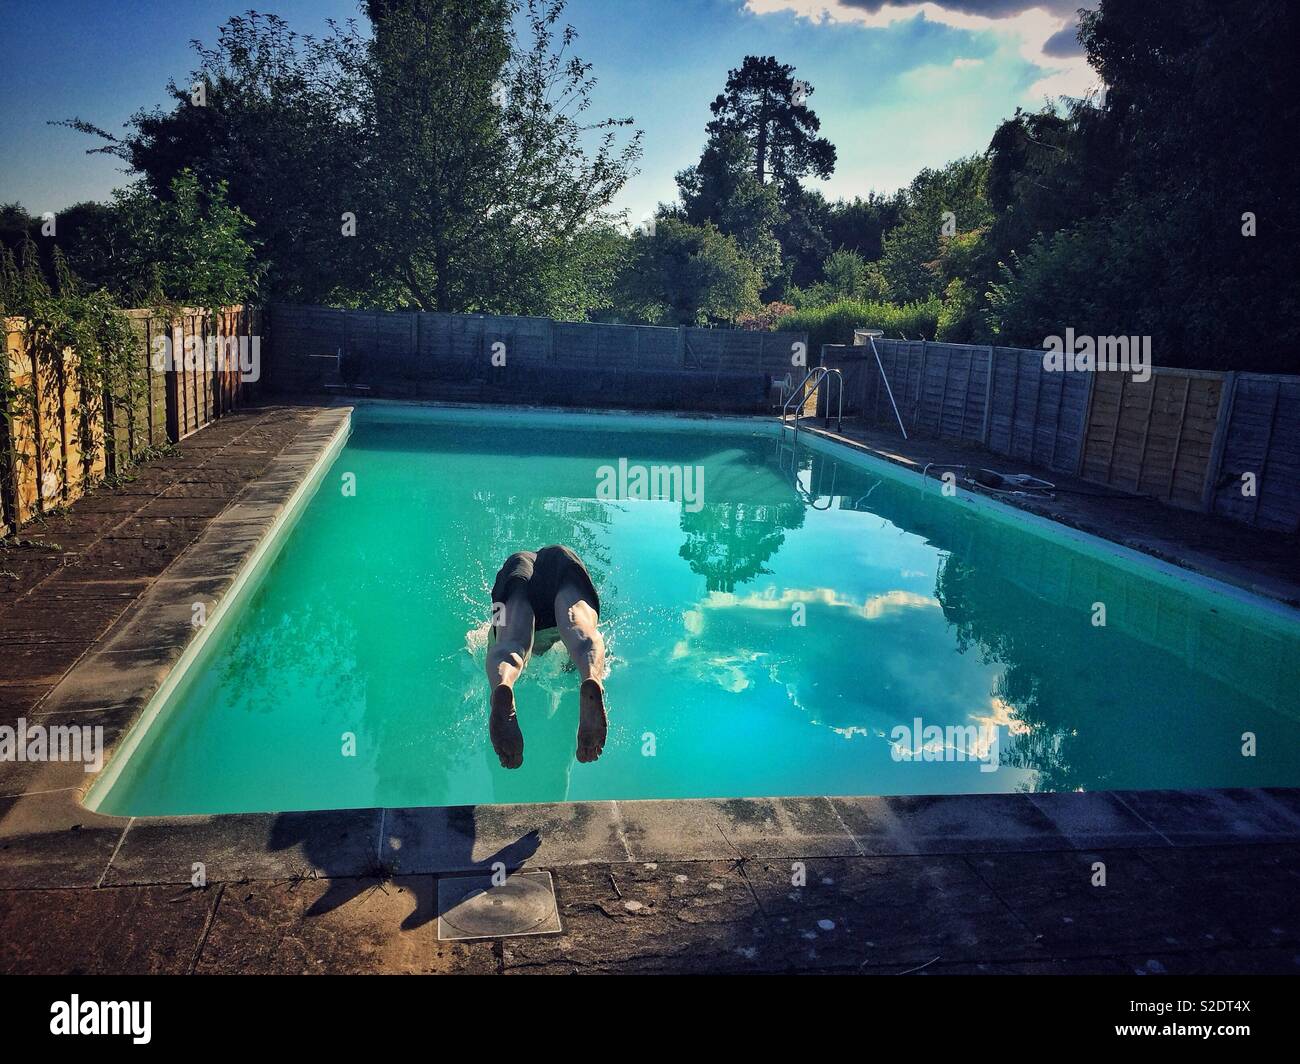 A man dives into a small, private open air pool in rural England Stock Photo